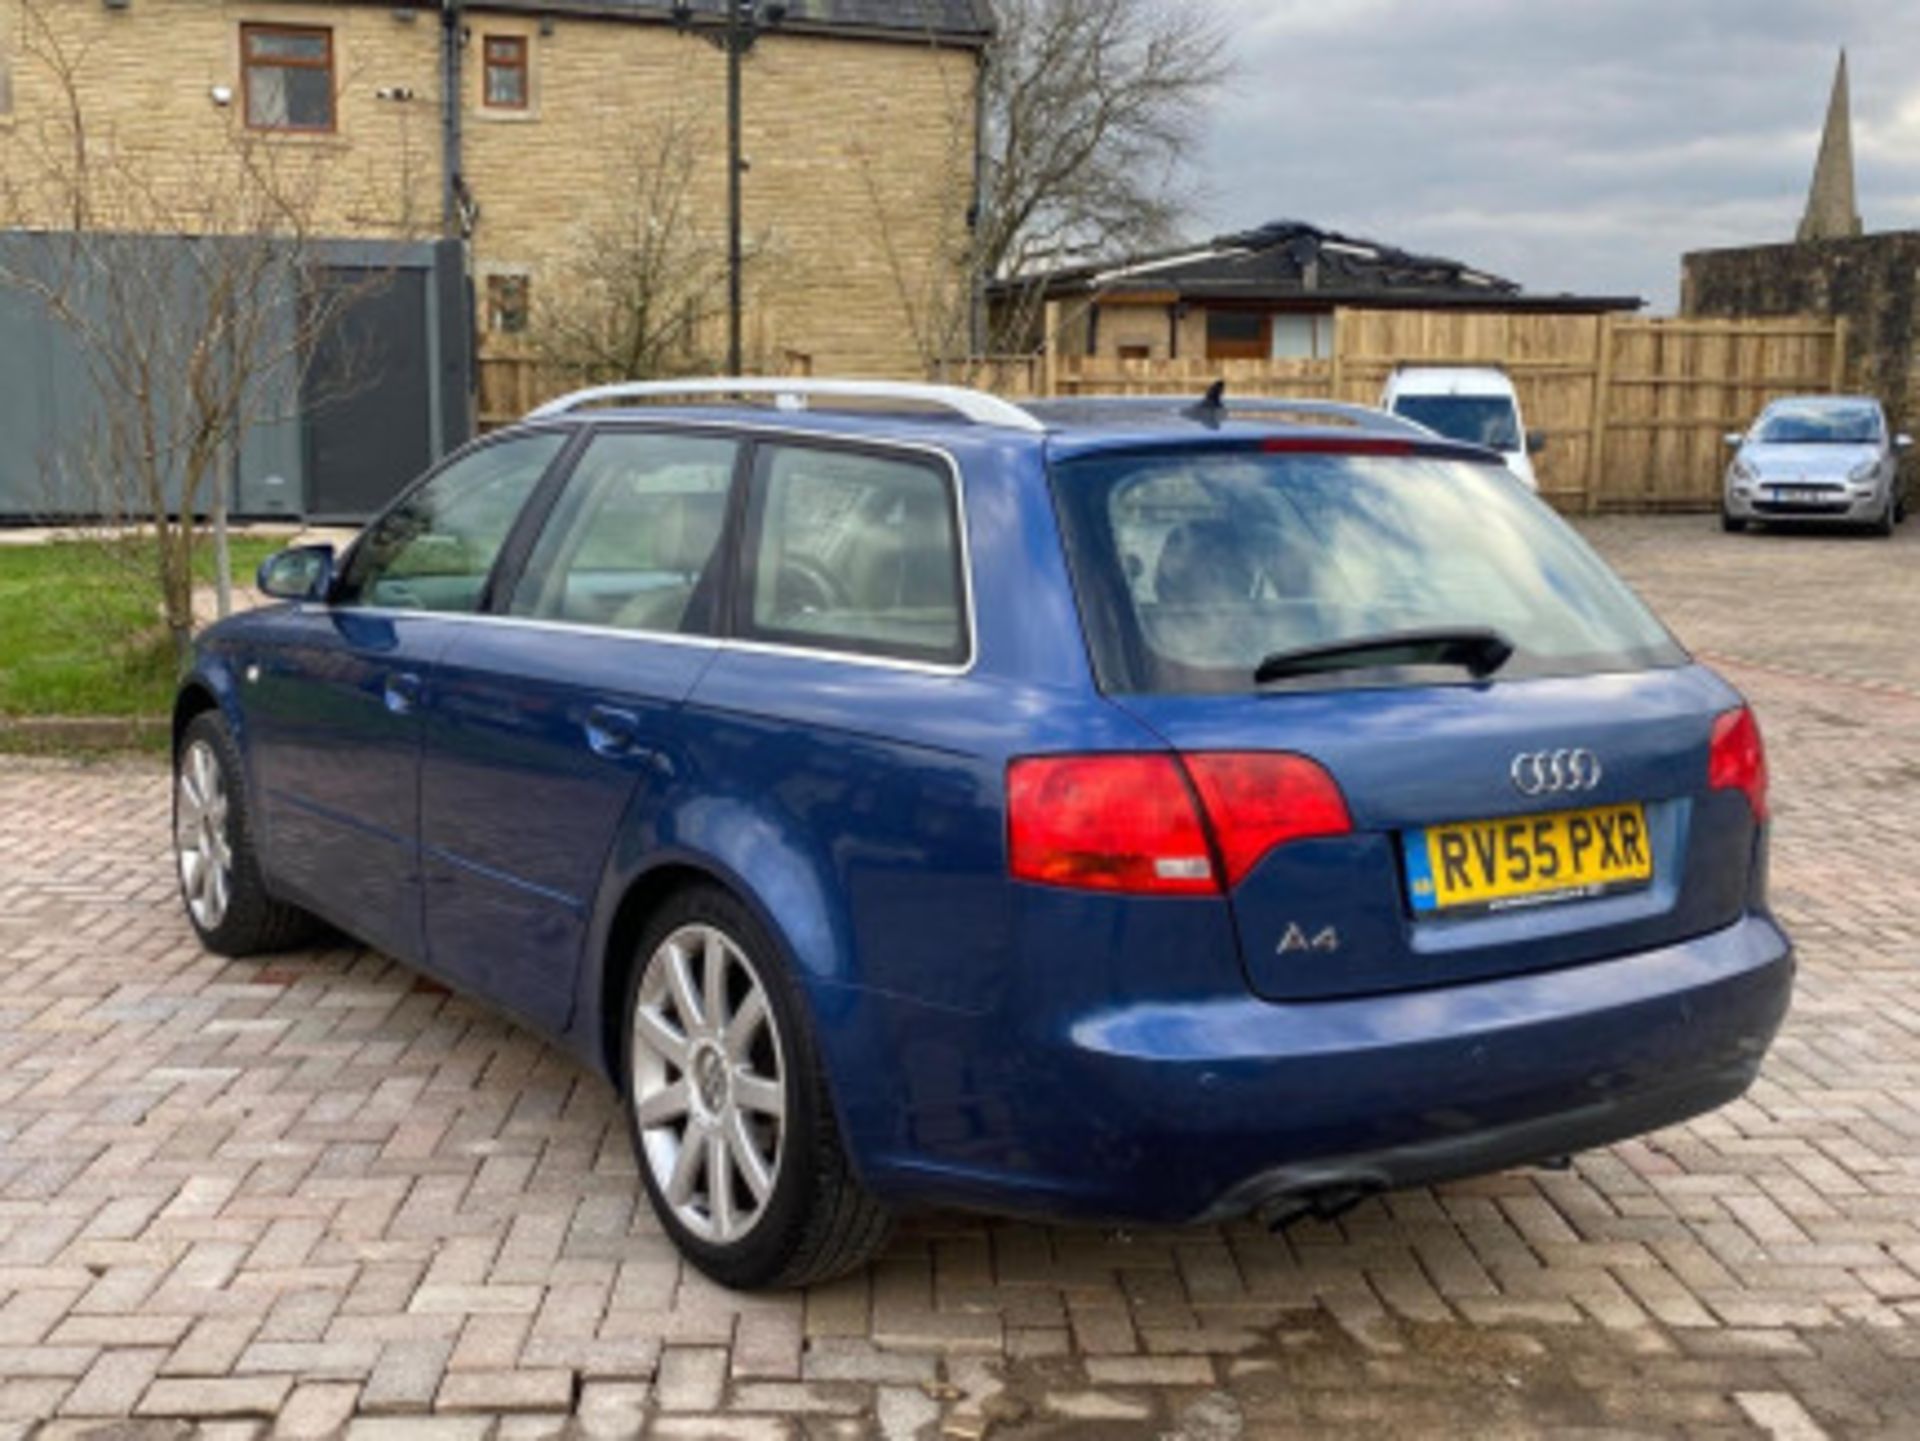 AUDI A4 AVANT 1.9 TDI SE 5DR ESTATE - RARE AND RELIABLE LUXURY WAGON >>--NO VAT ON HAMMER--<< - Image 24 of 63